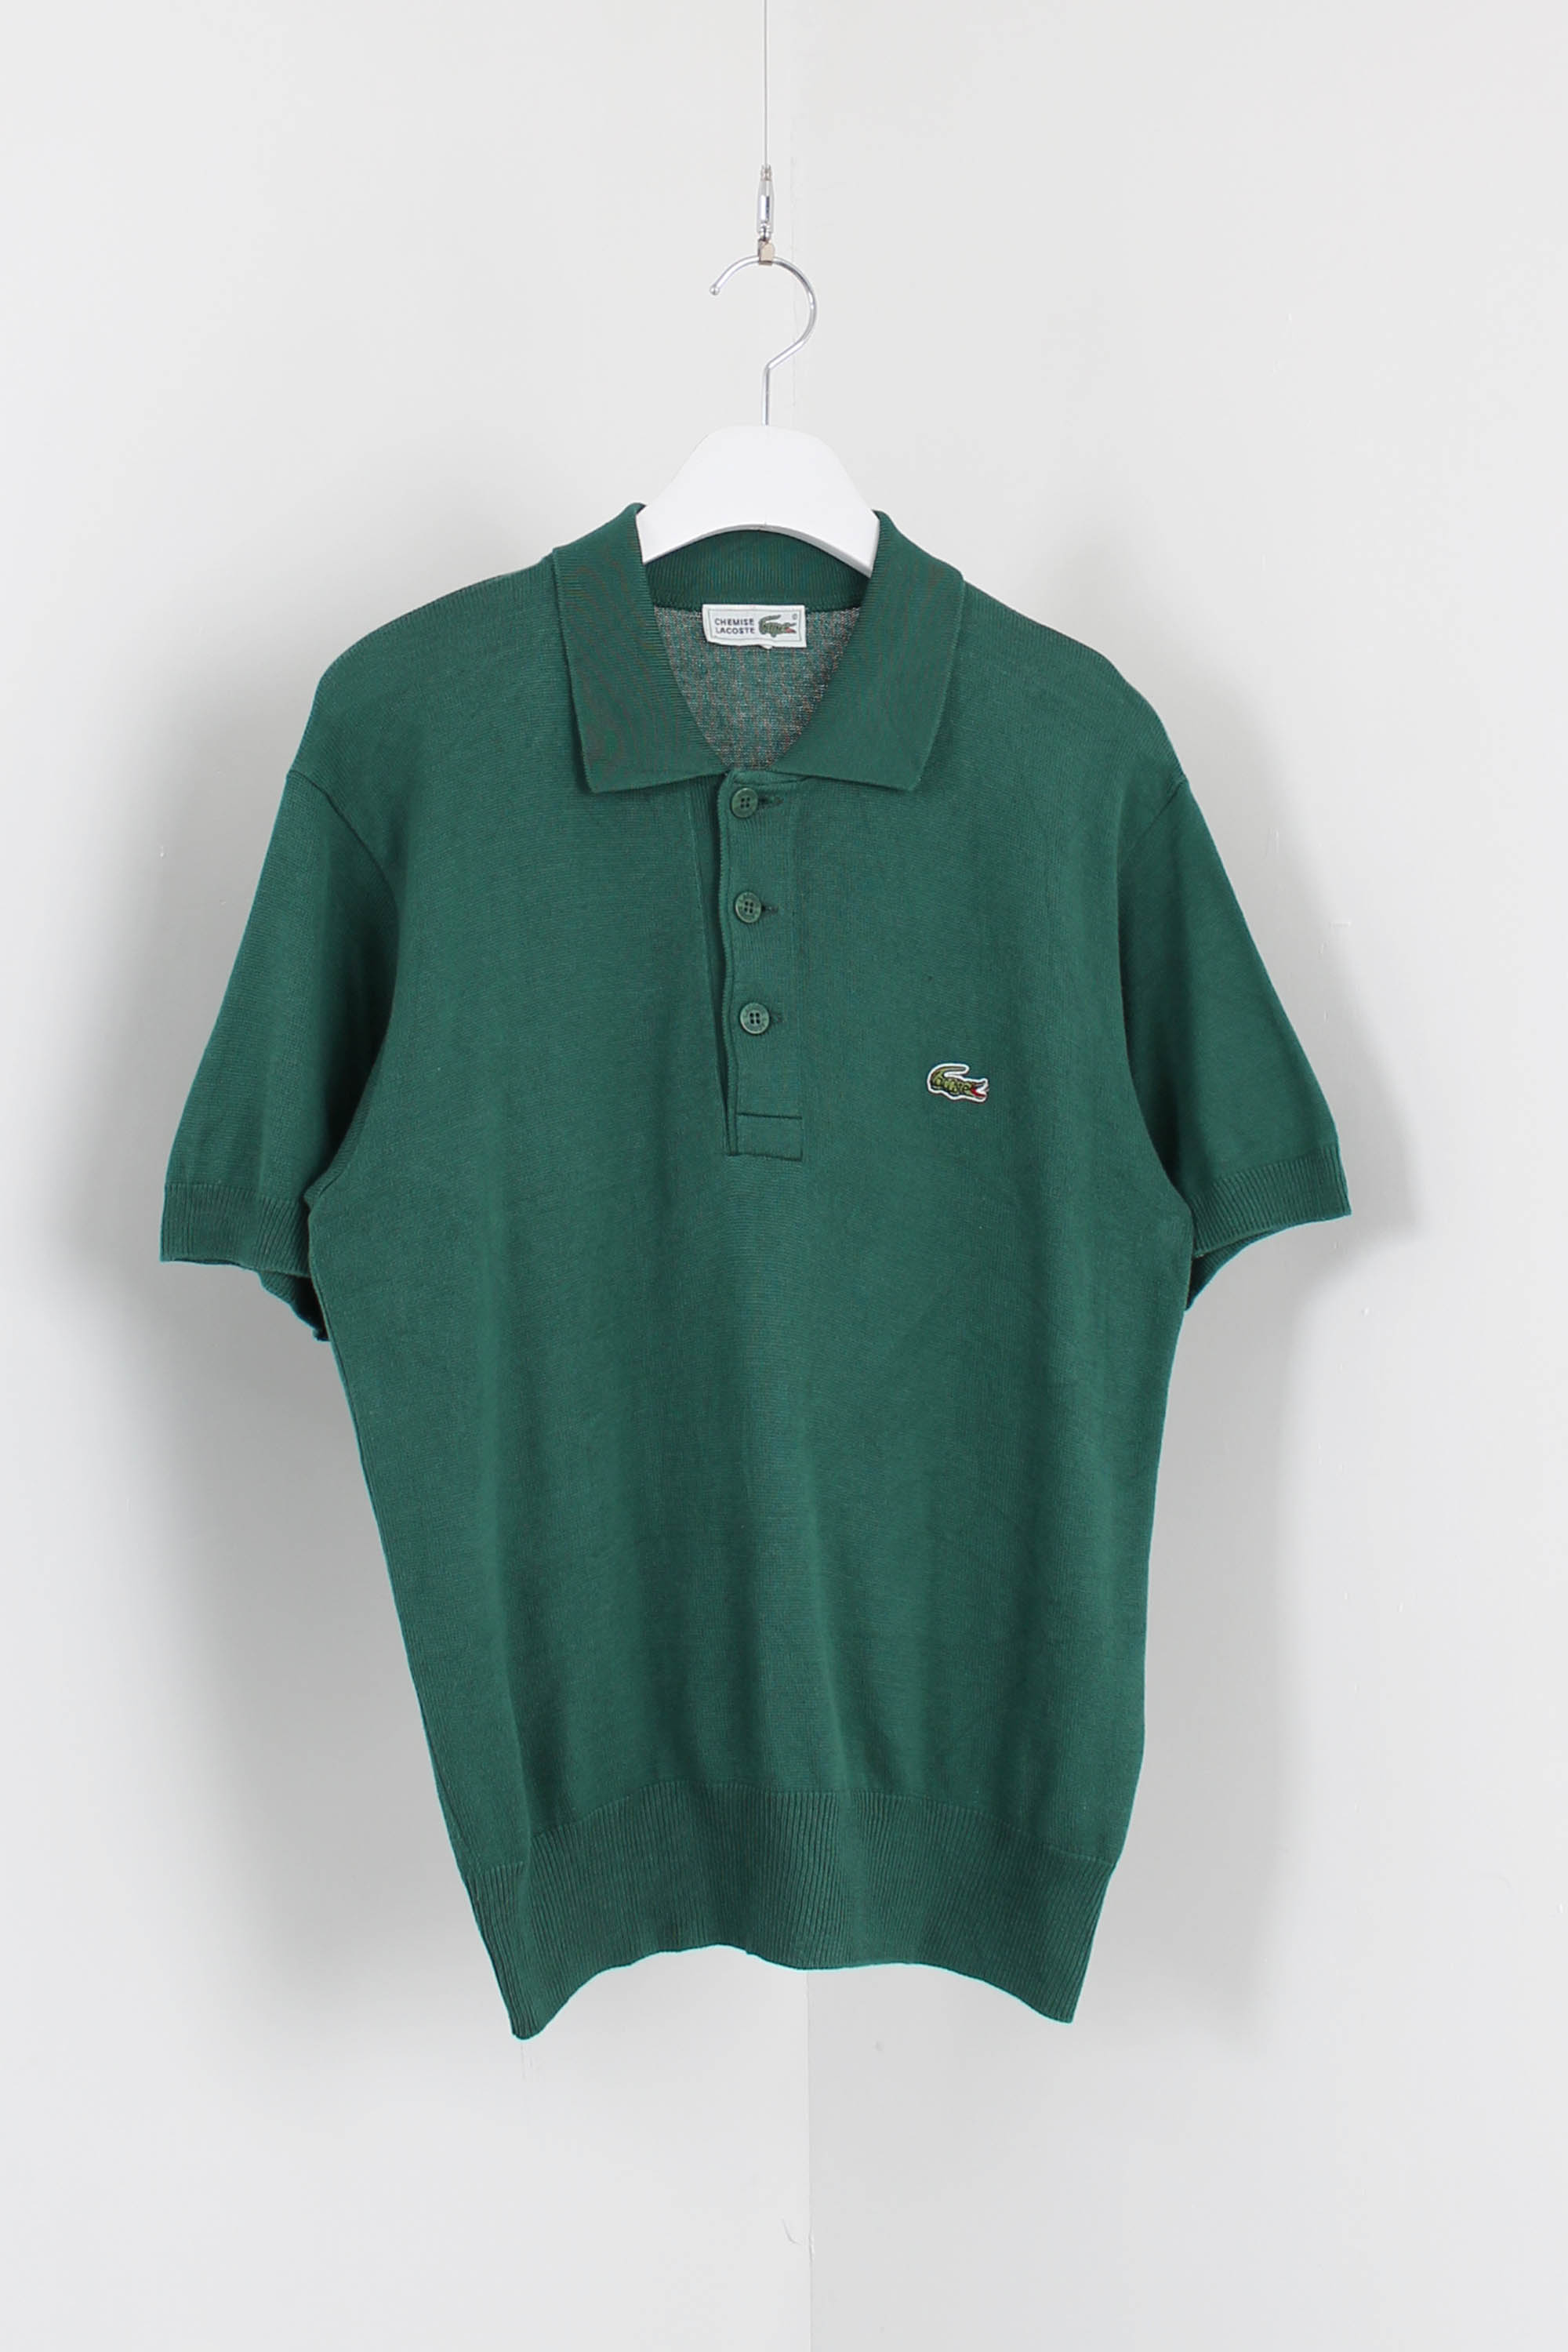 Lacoste collar knit